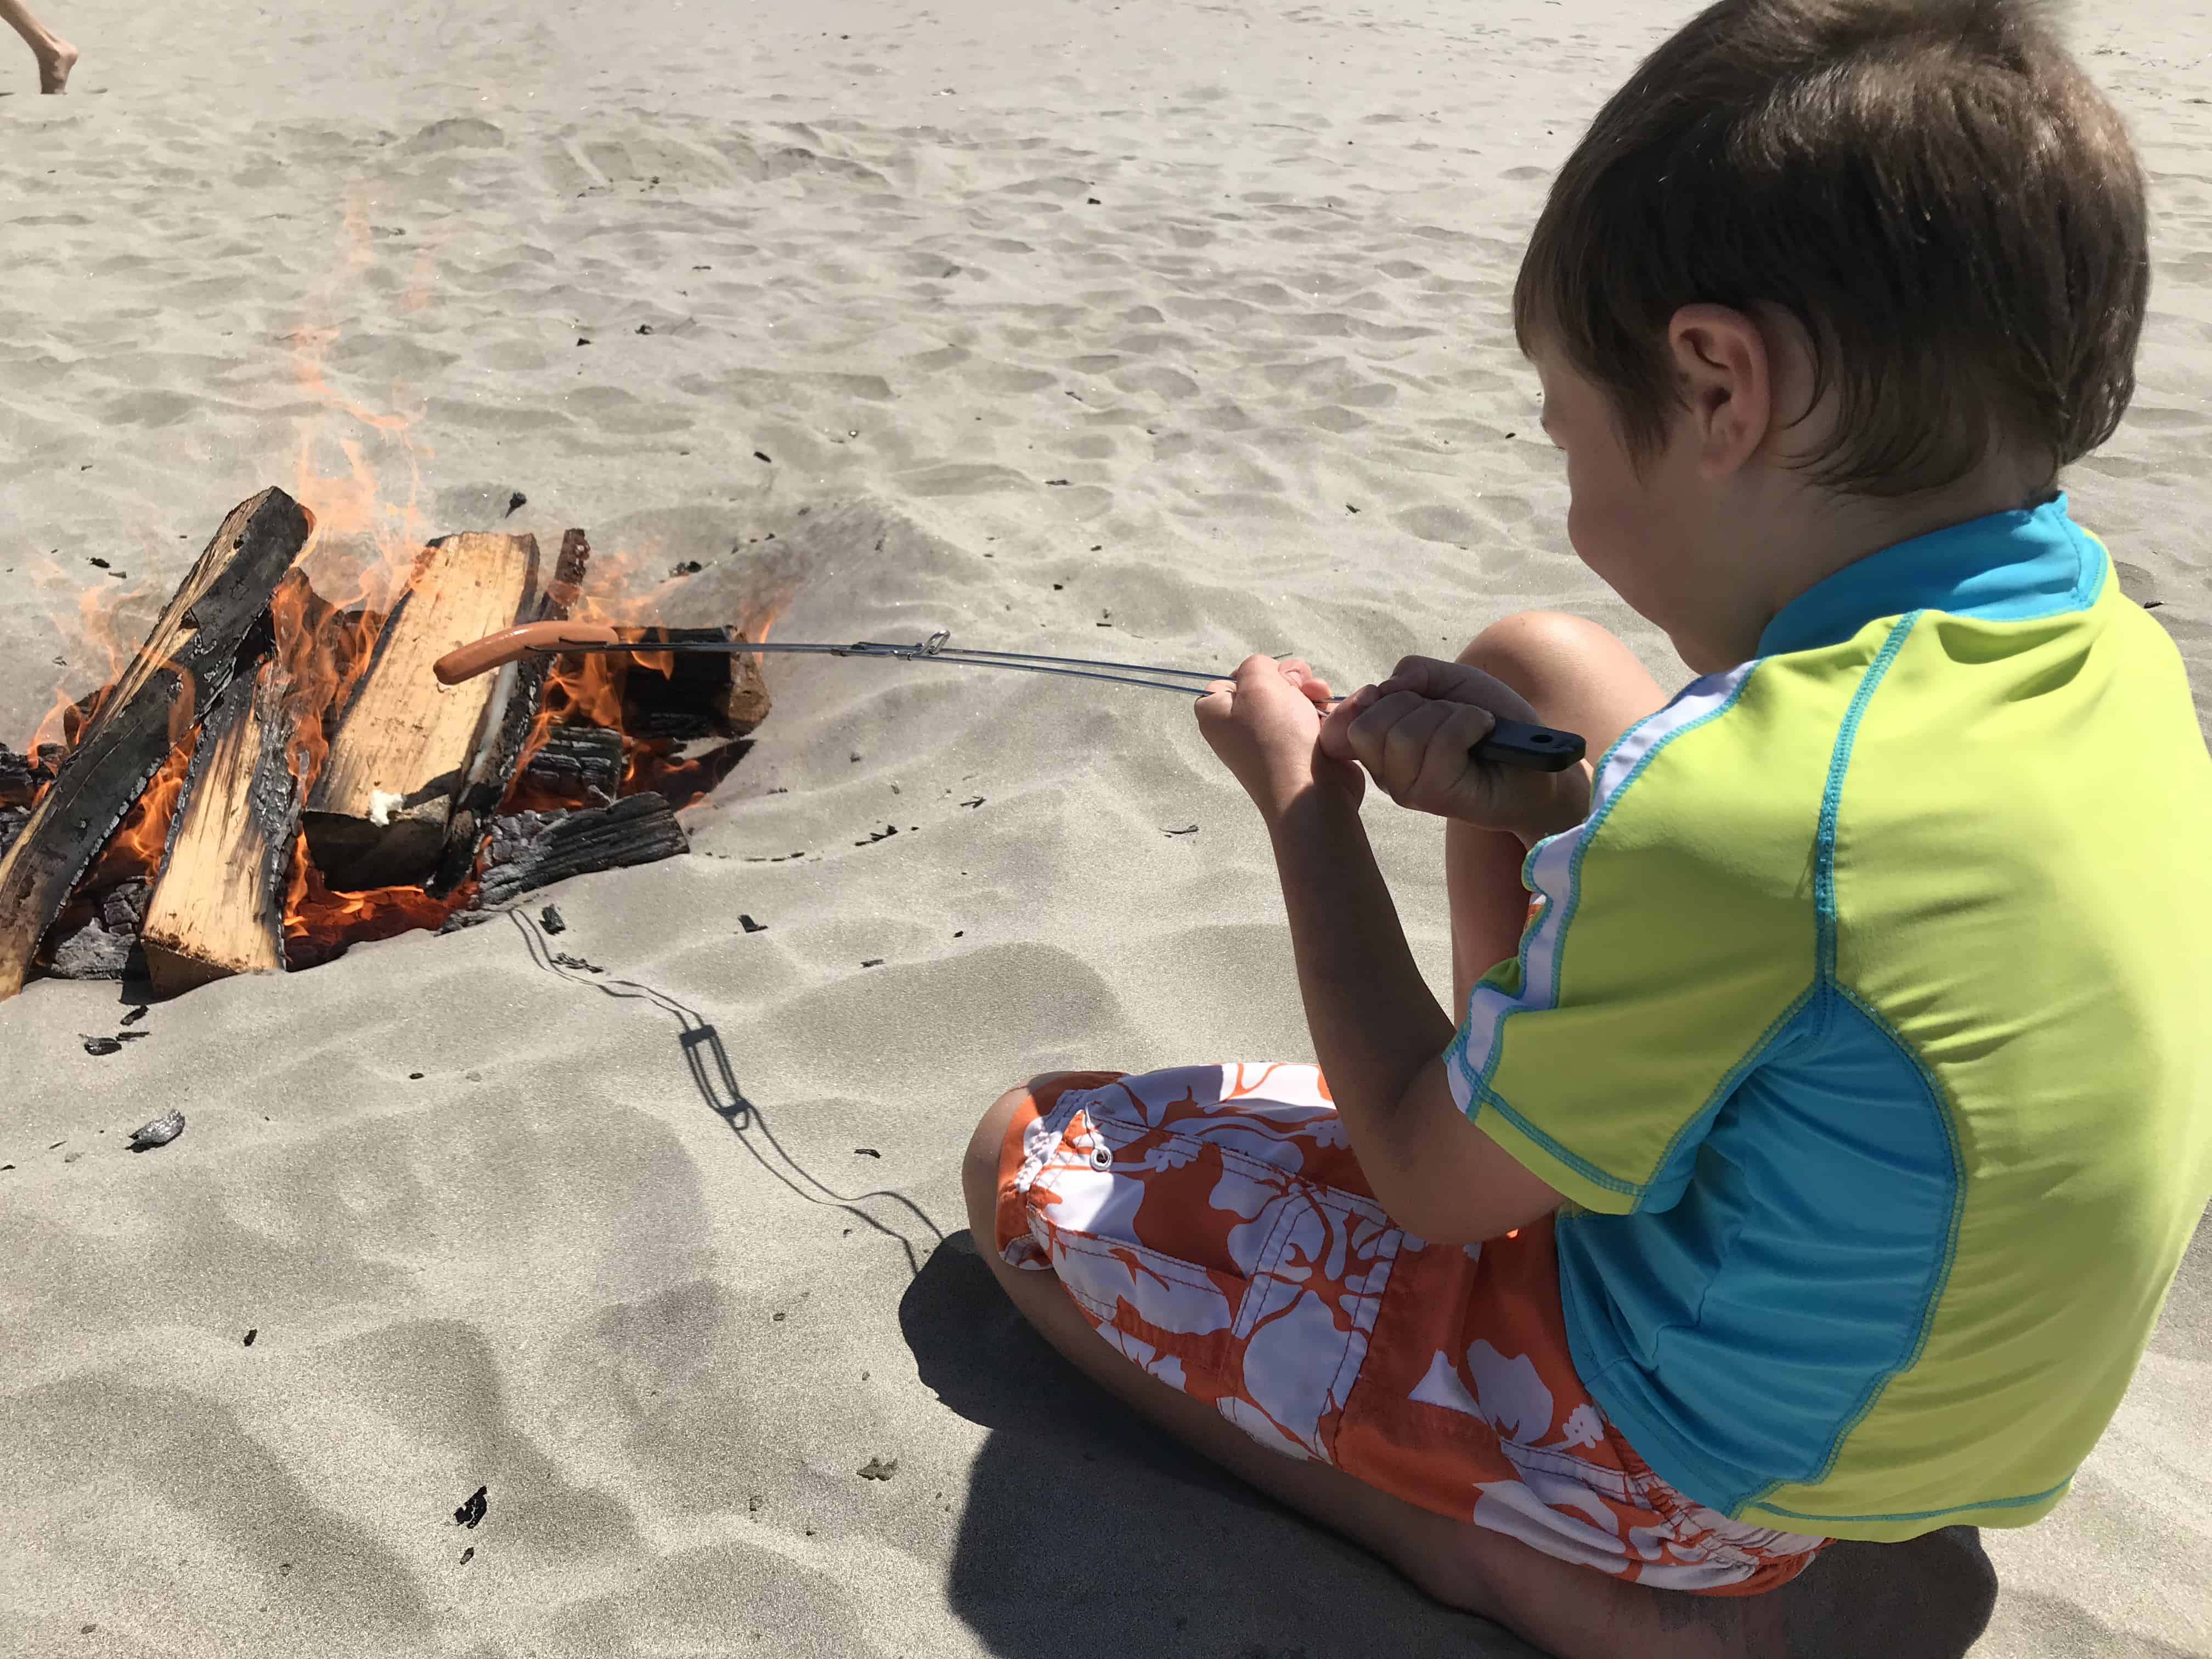 Boy on sand with campfire. Seaside Oregon has a beautiful beach that permits campfires.